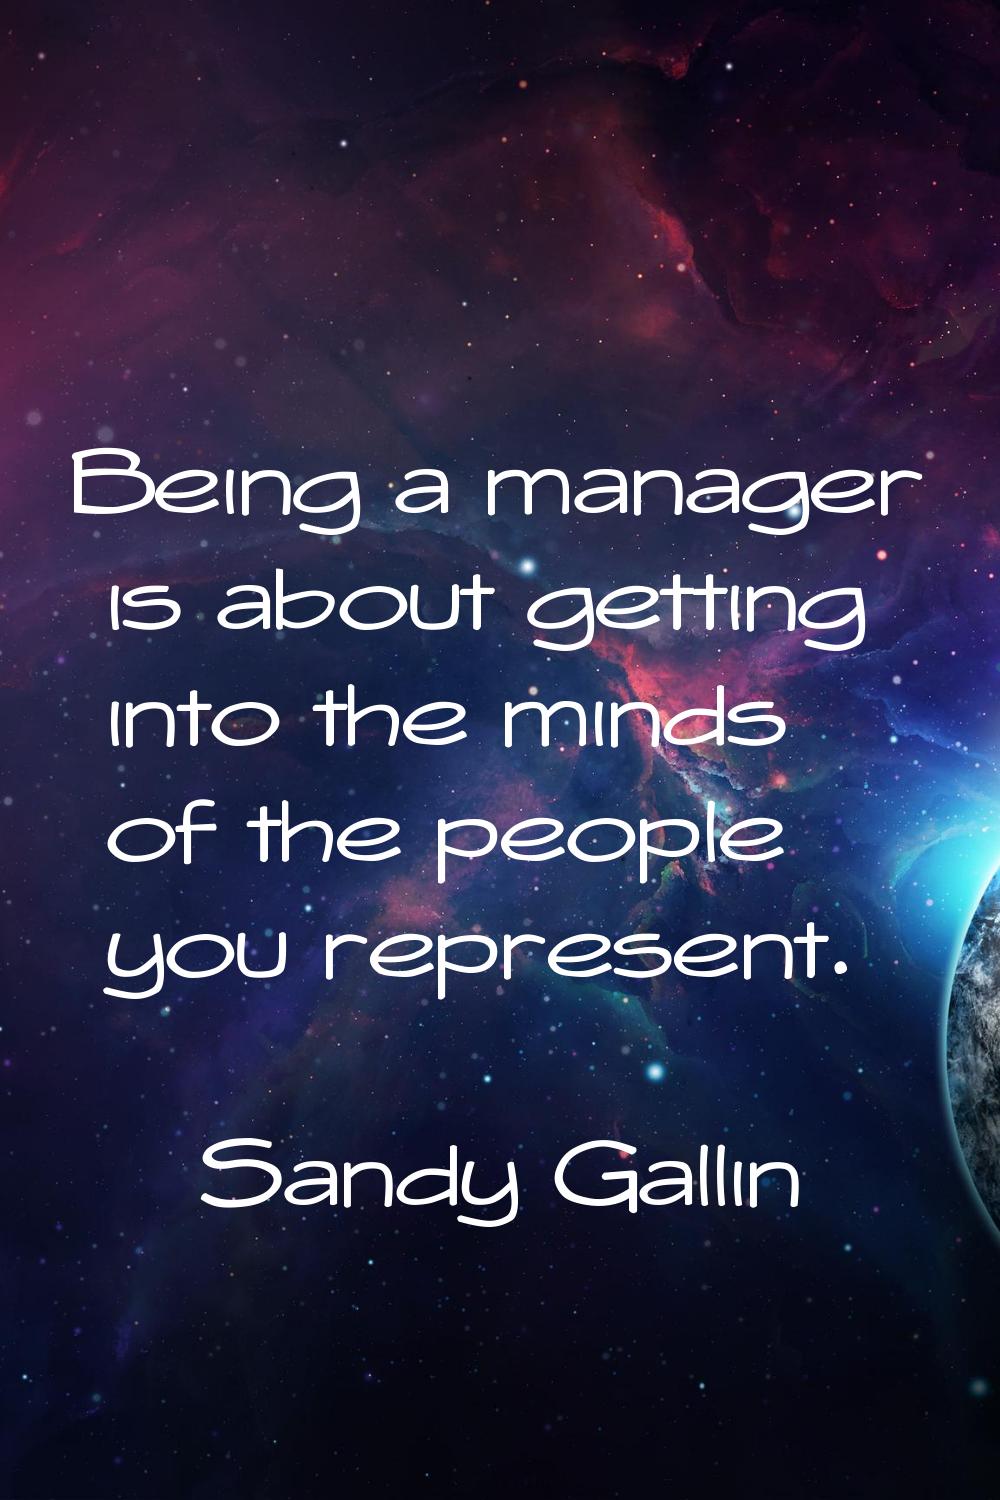 Being a manager is about getting into the minds of the people you represent.